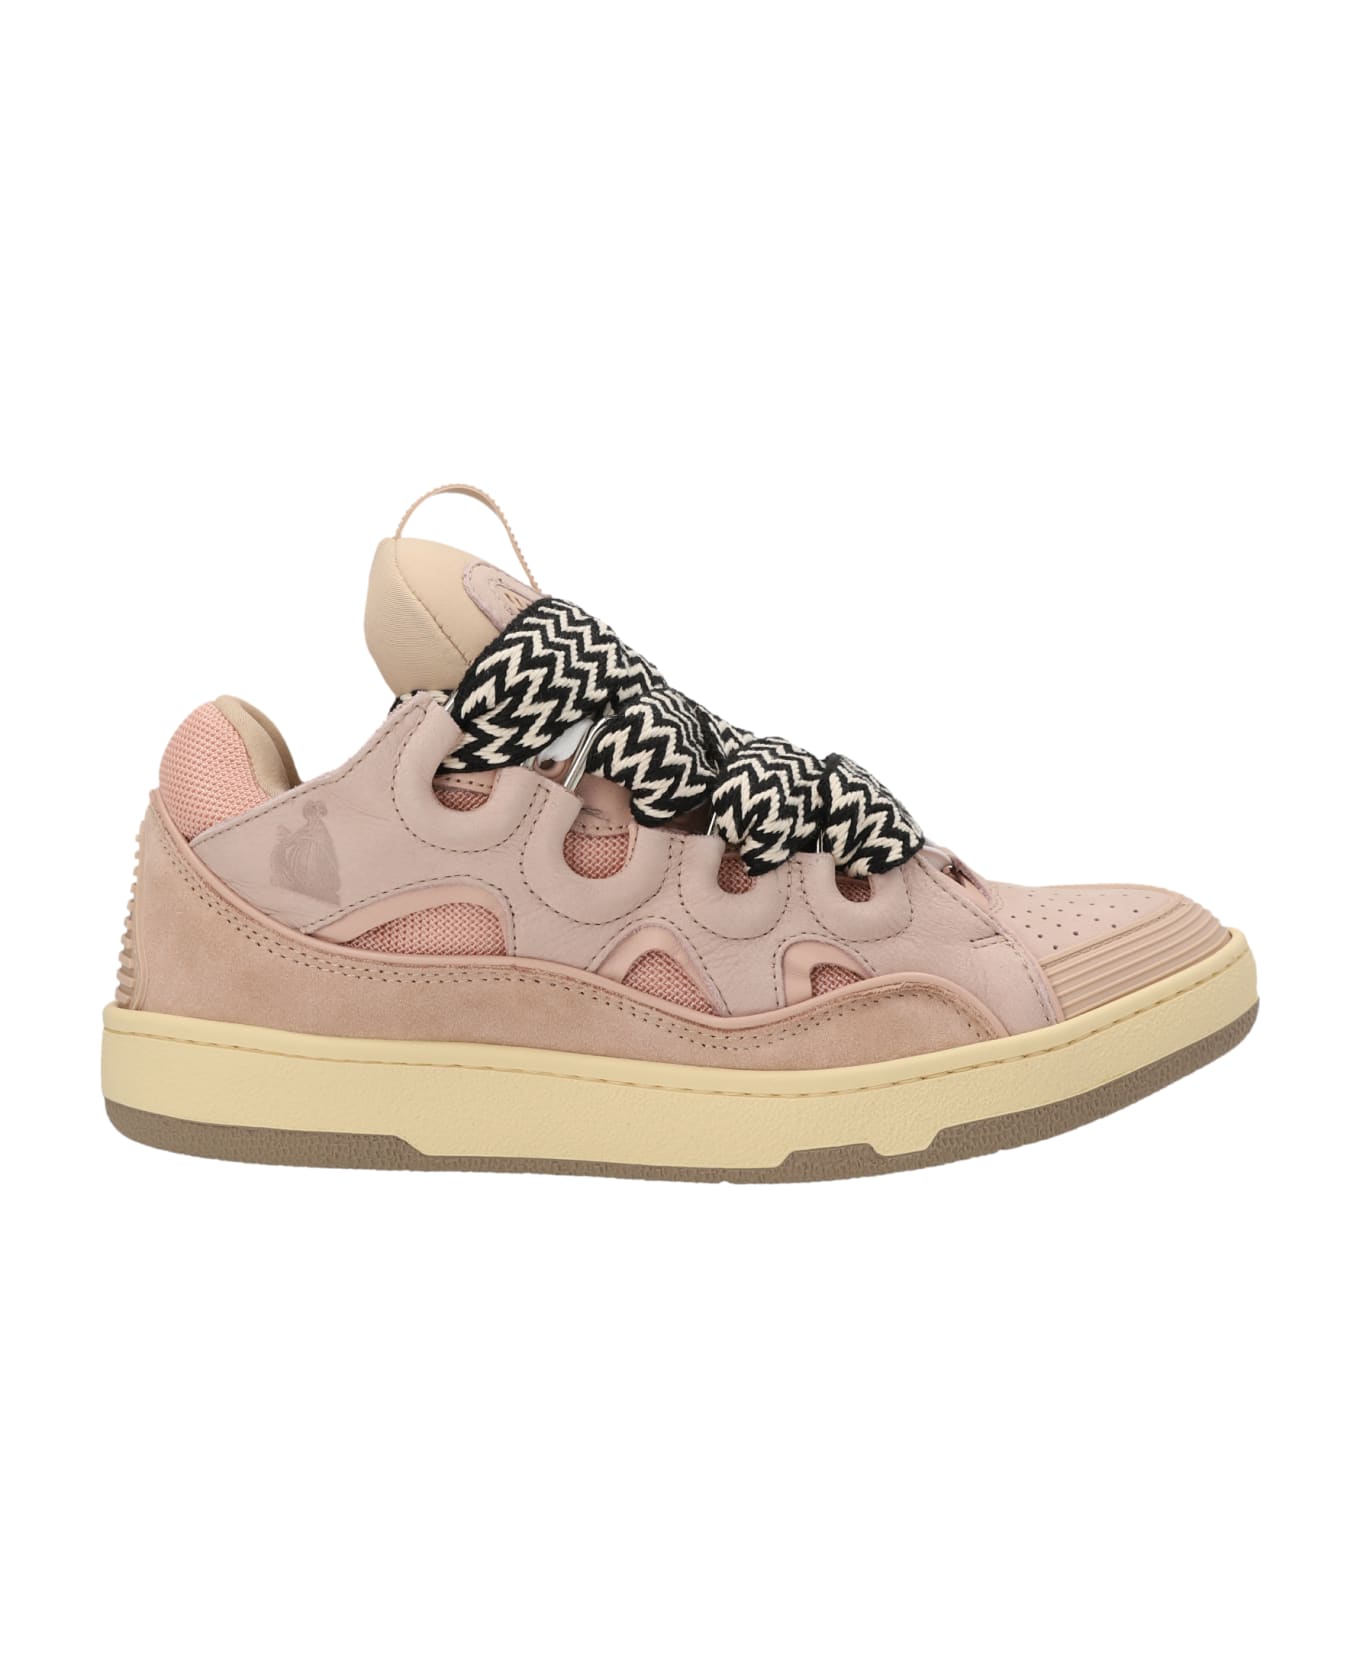 Lanvin 'curb' Sneakers - PINK スニーカー